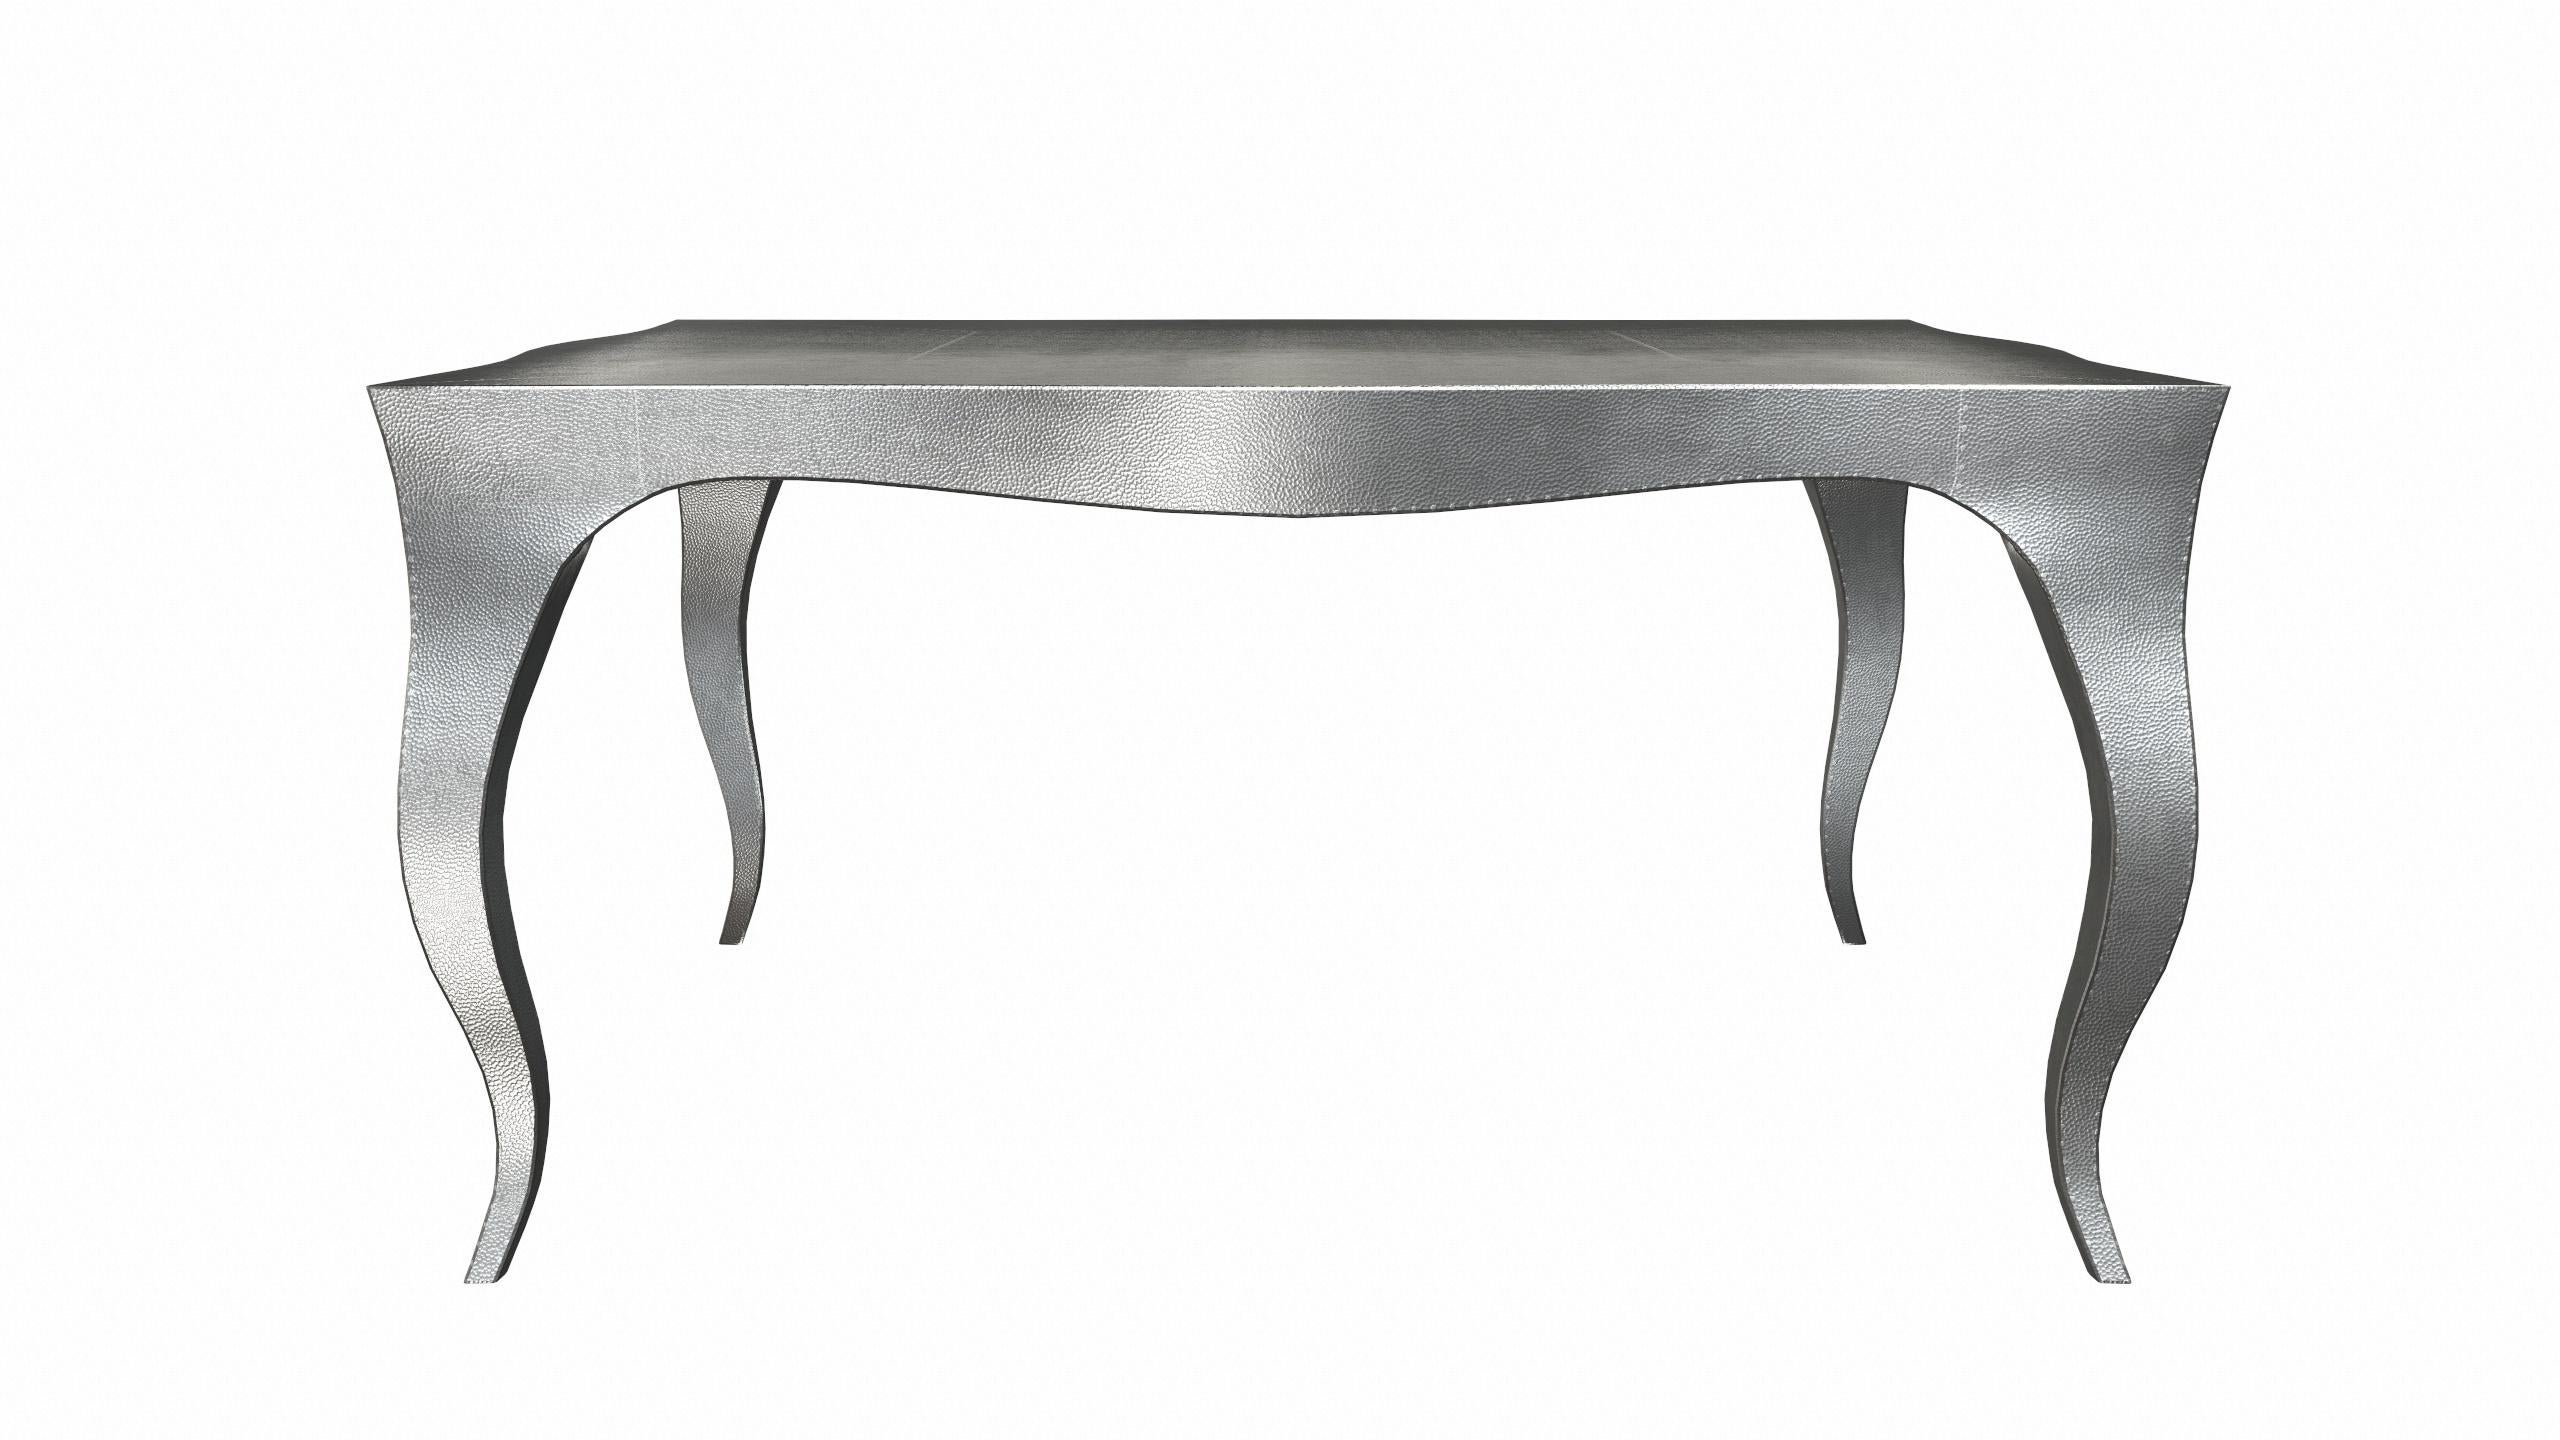 Other Louise Art Deco Industrial Tables Mid. Hammered White Bronze 18.5x18.5x10 inch For Sale